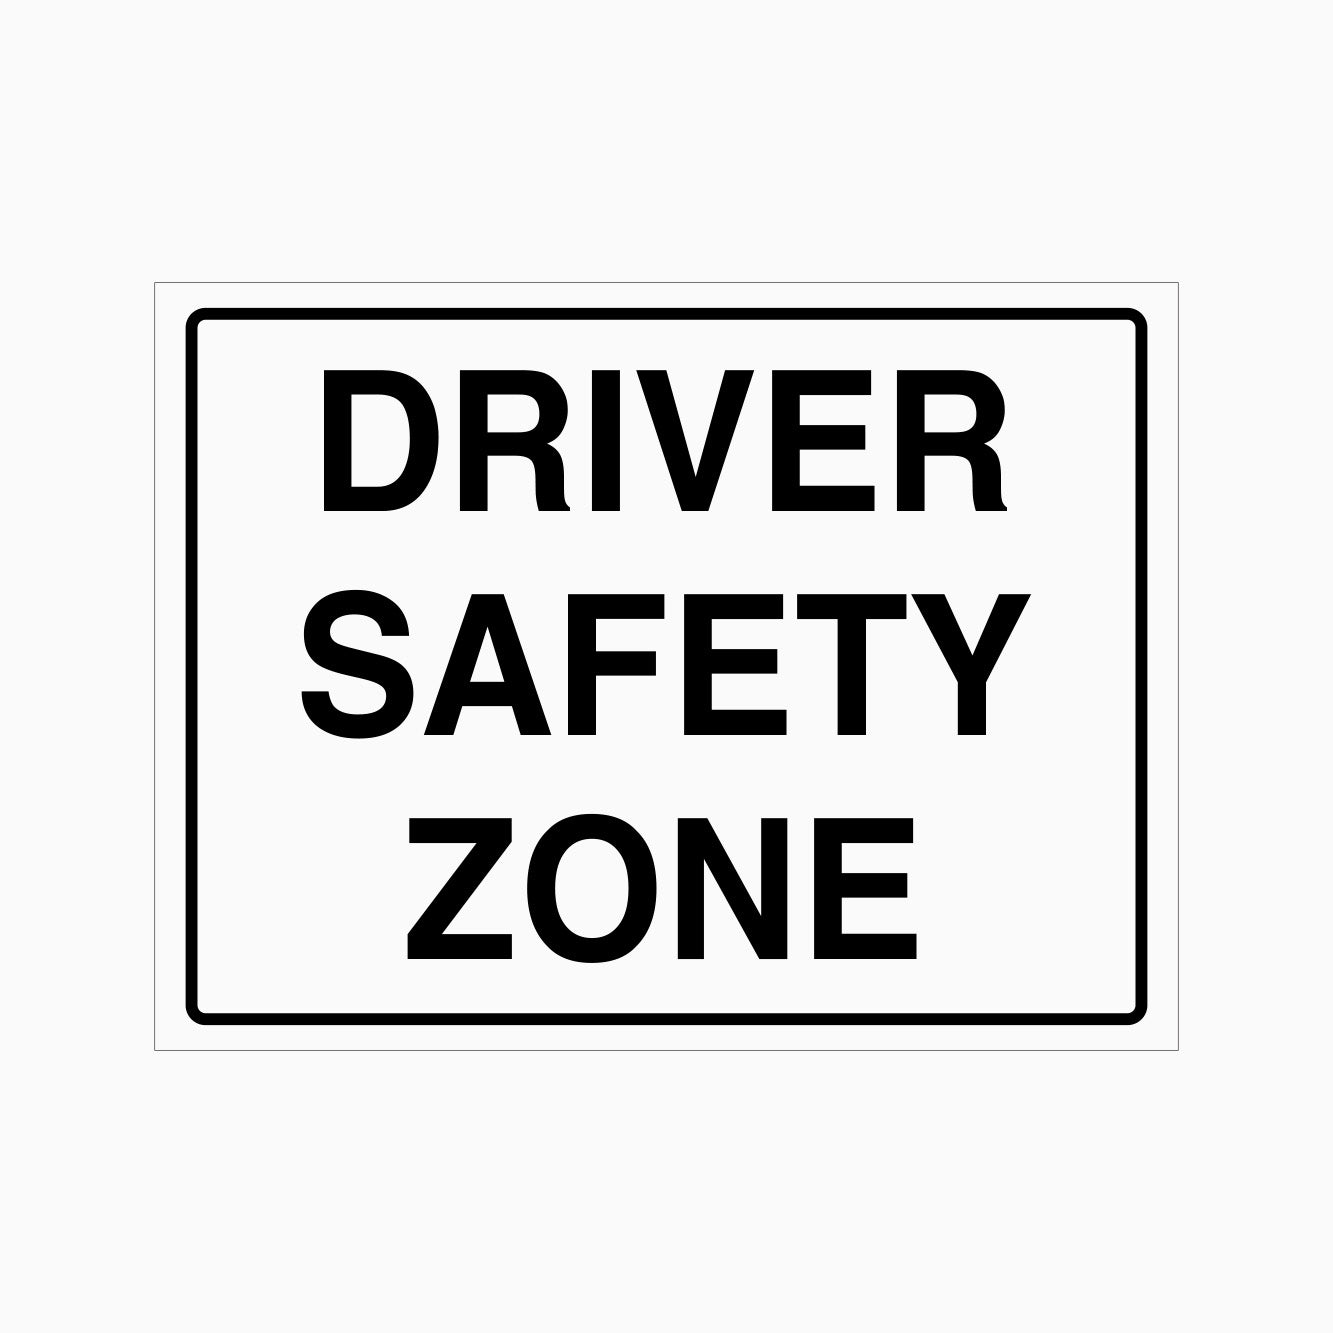 DRIVER SAFETY ZONE SIGN